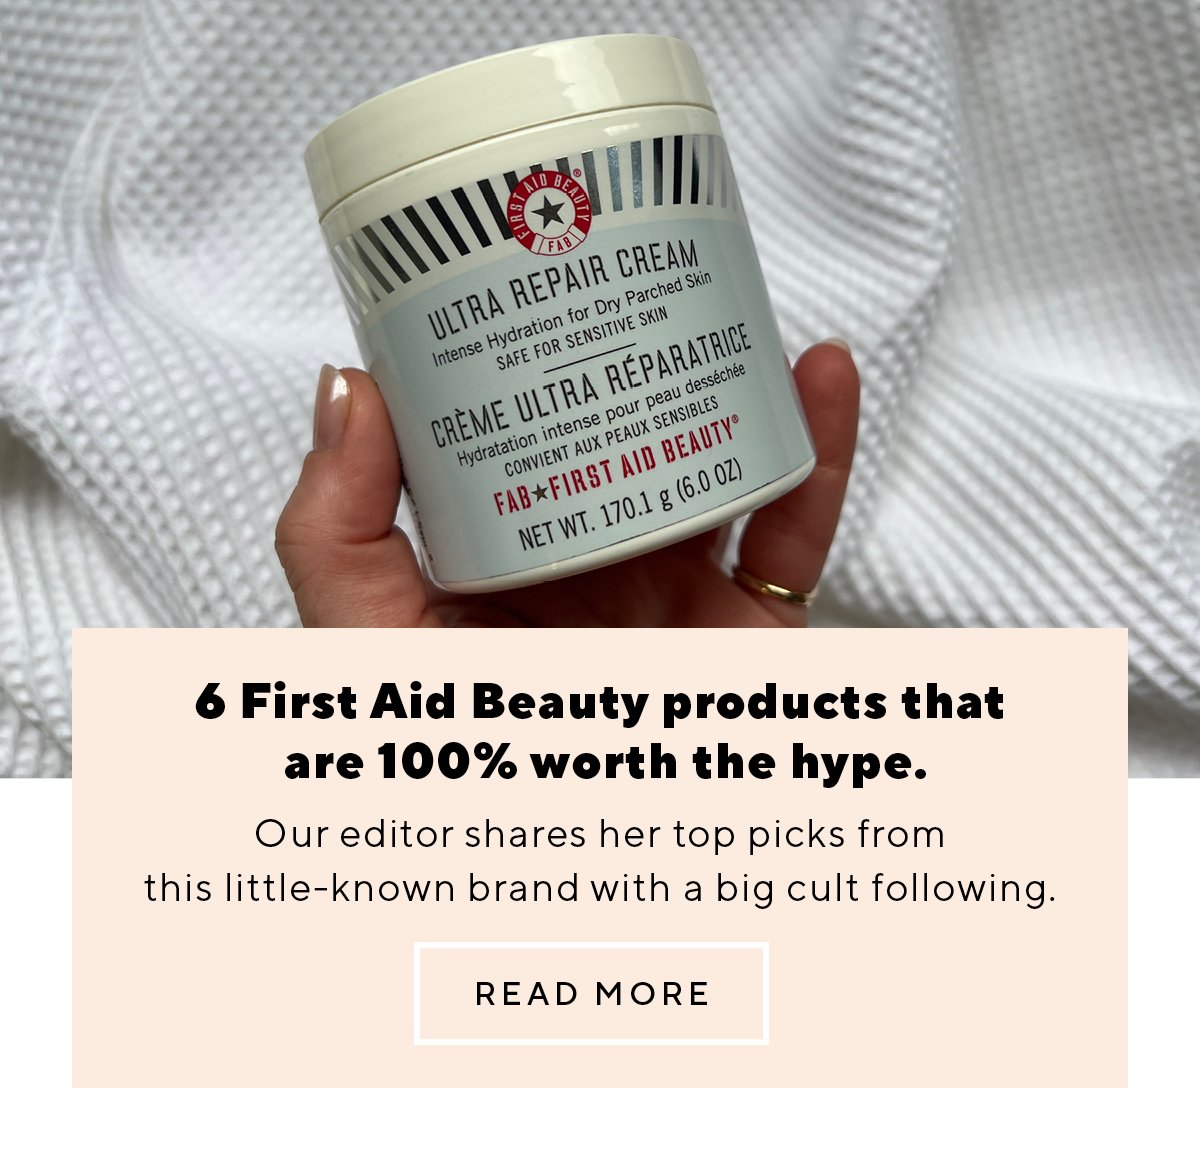 6 First Aid Beauty products that are 100% worth the hype.